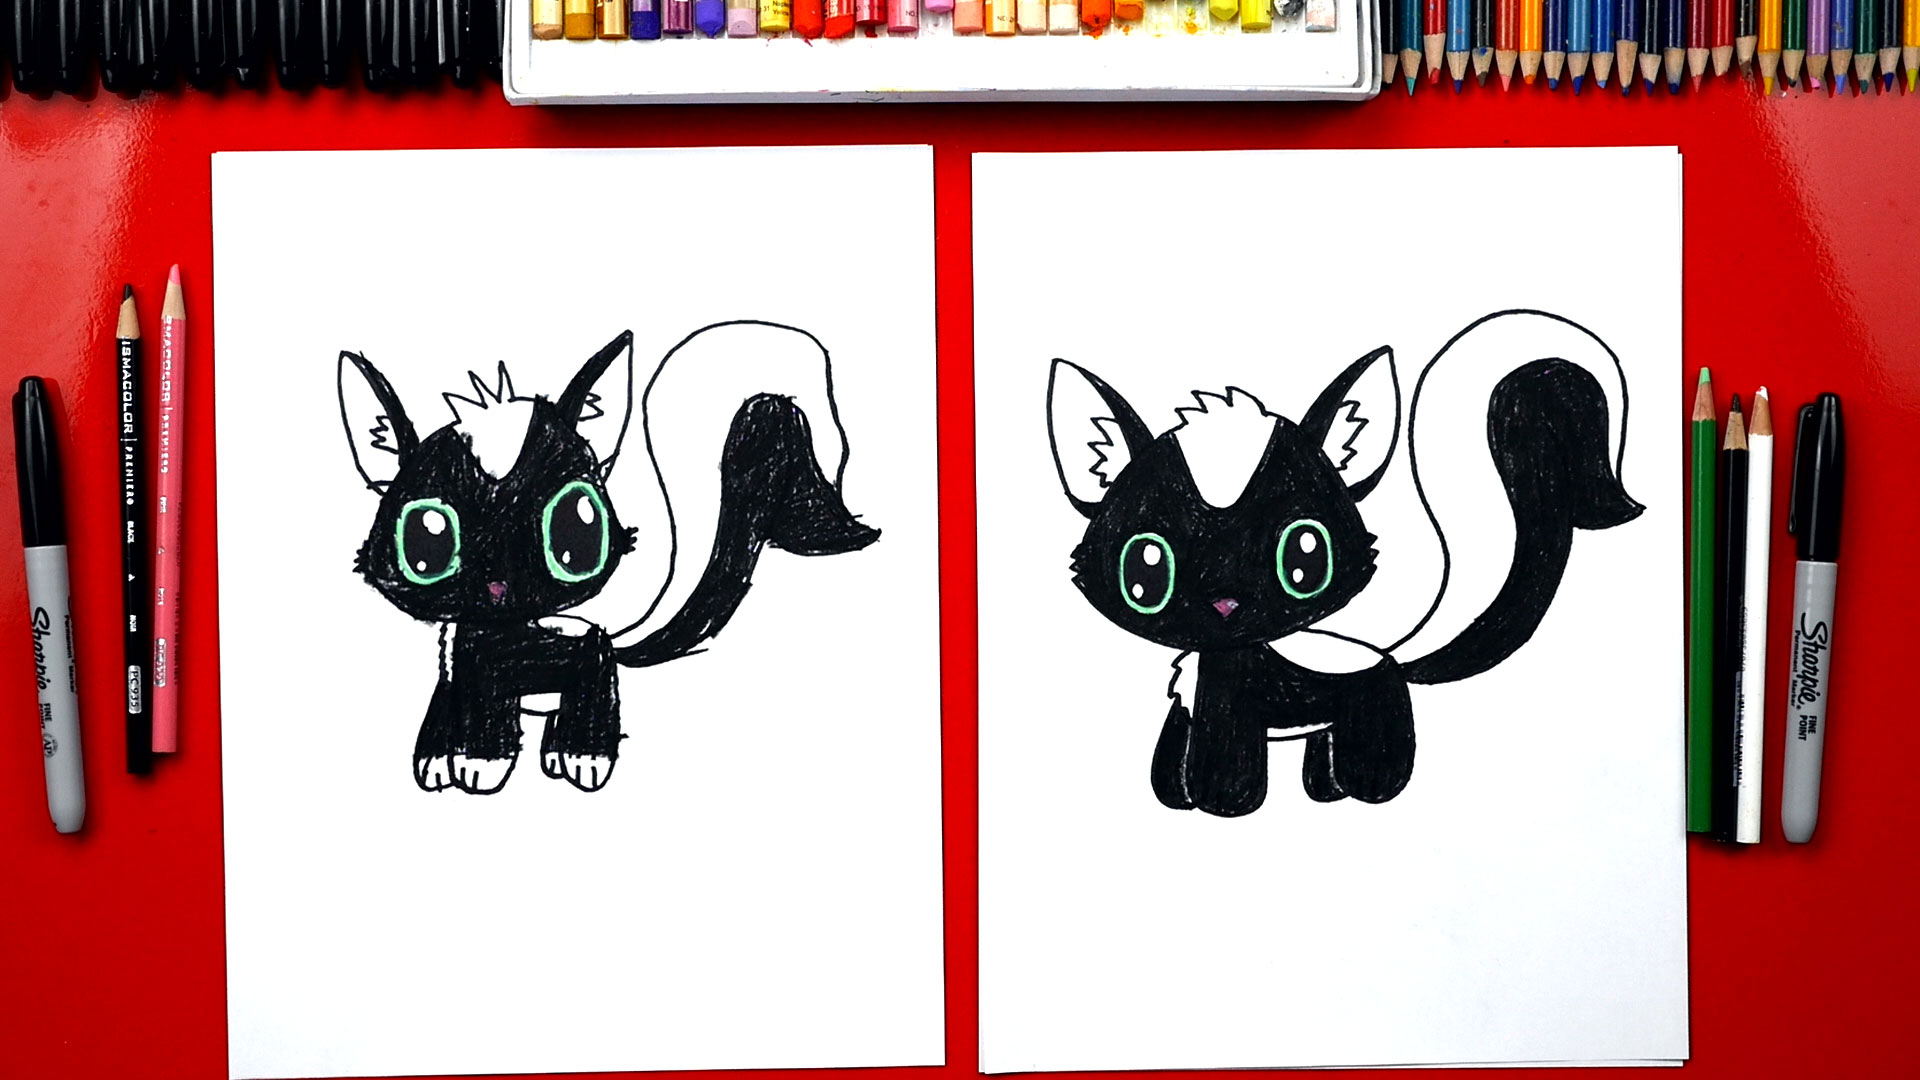 How To Draw A Cartoon Skunk